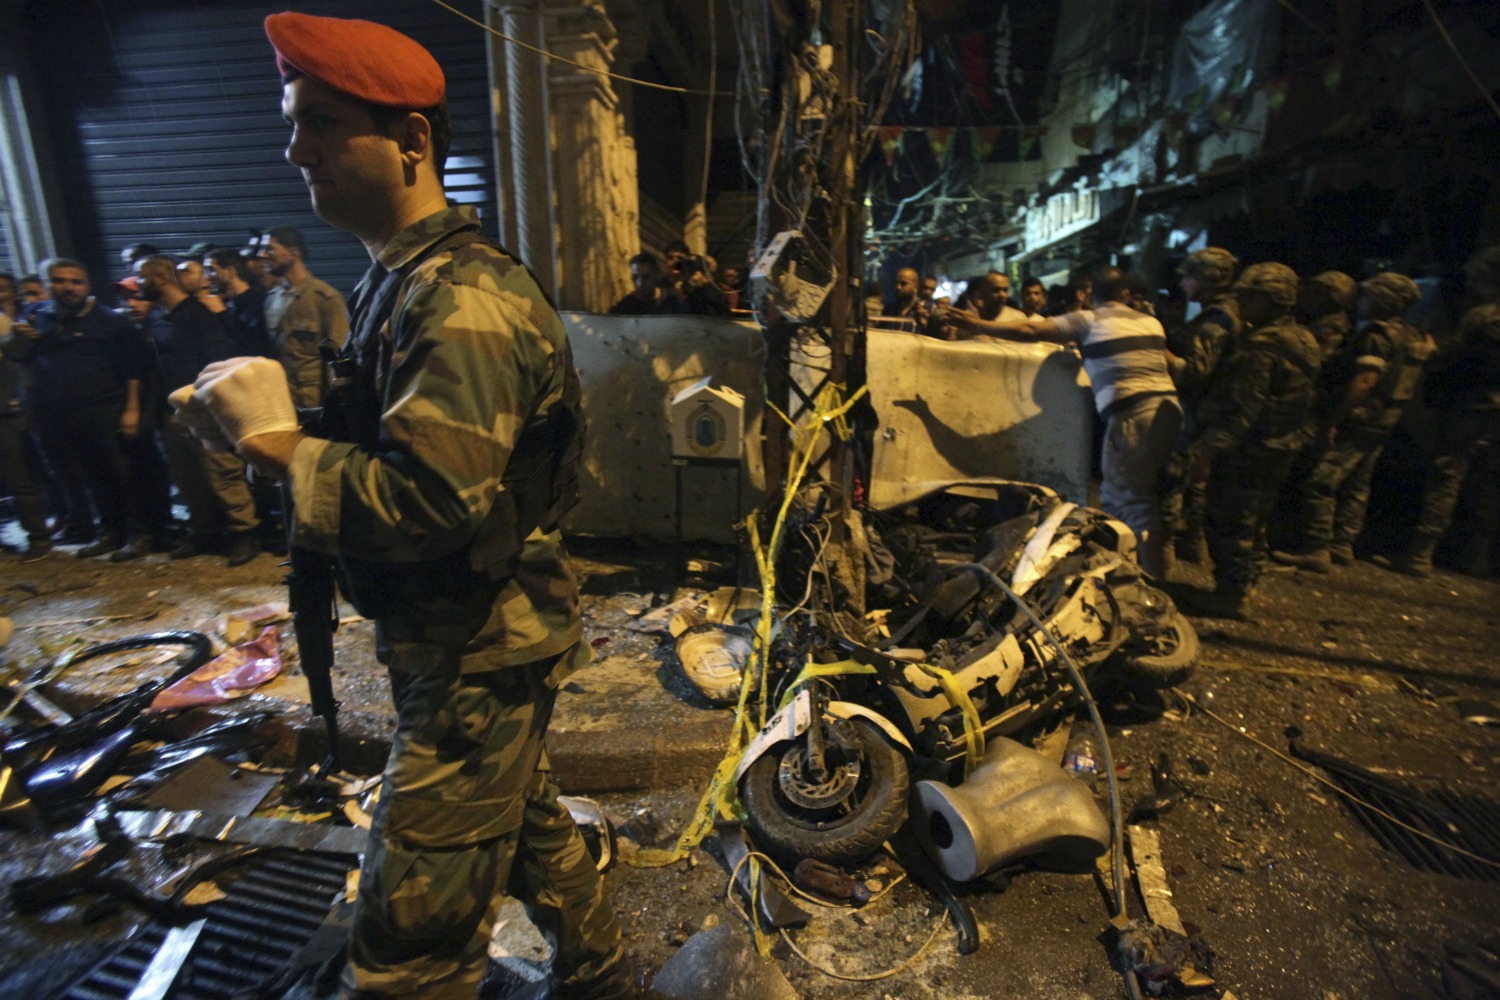 Nine terrorists responsible for the Beirut attack have been arrested